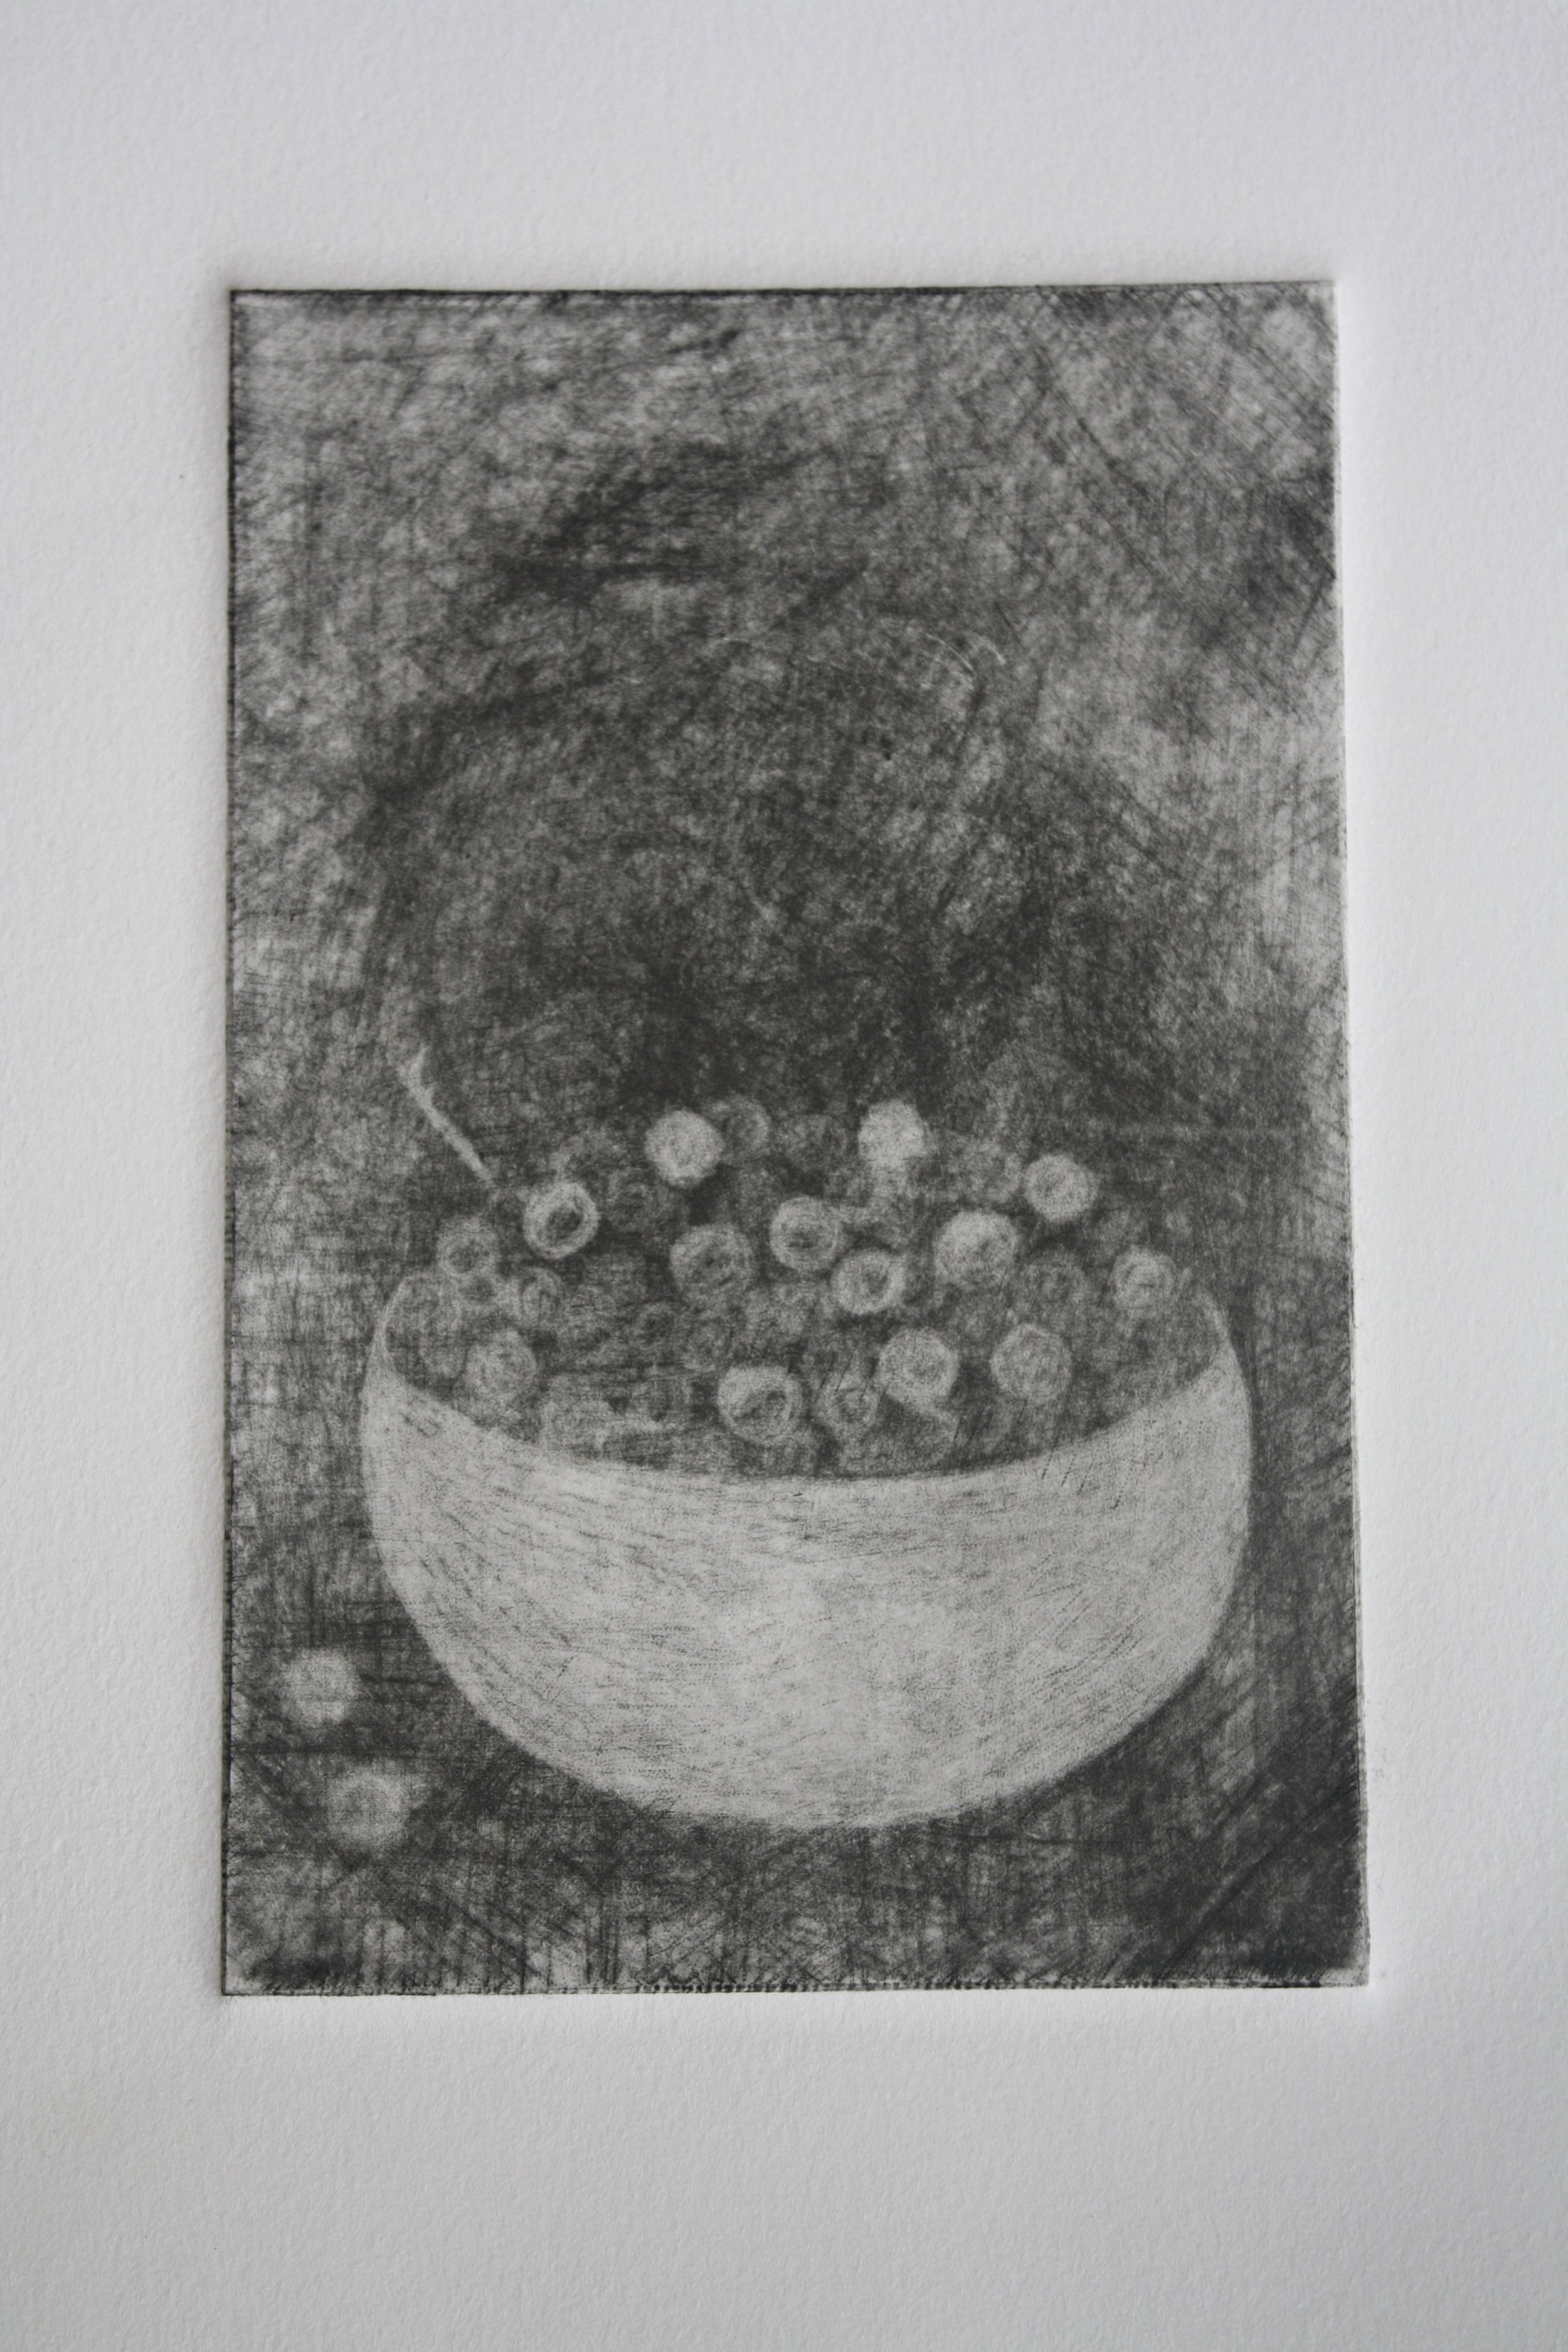  Grapes, Edition of Three - Two available  Etching on paper, image measures 3.75"x6" (unframed). 